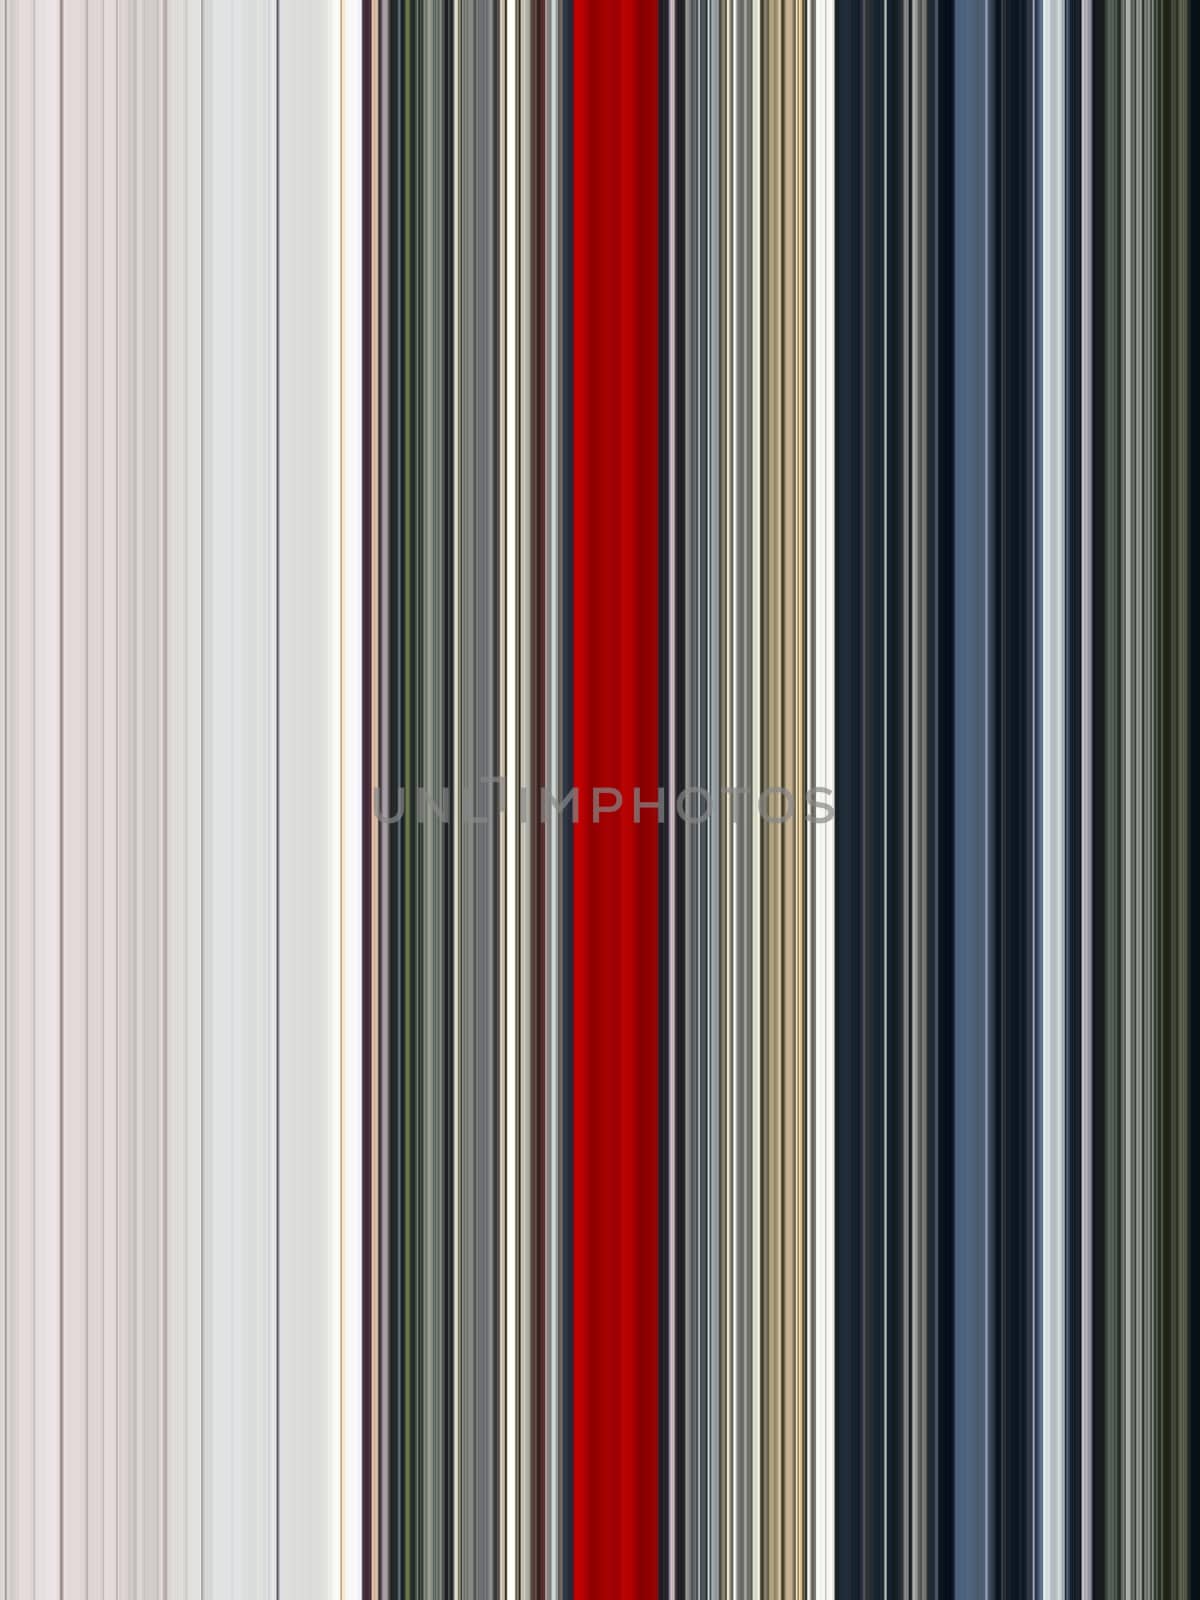 White, red, brown, grey and black abstract vertical lines background